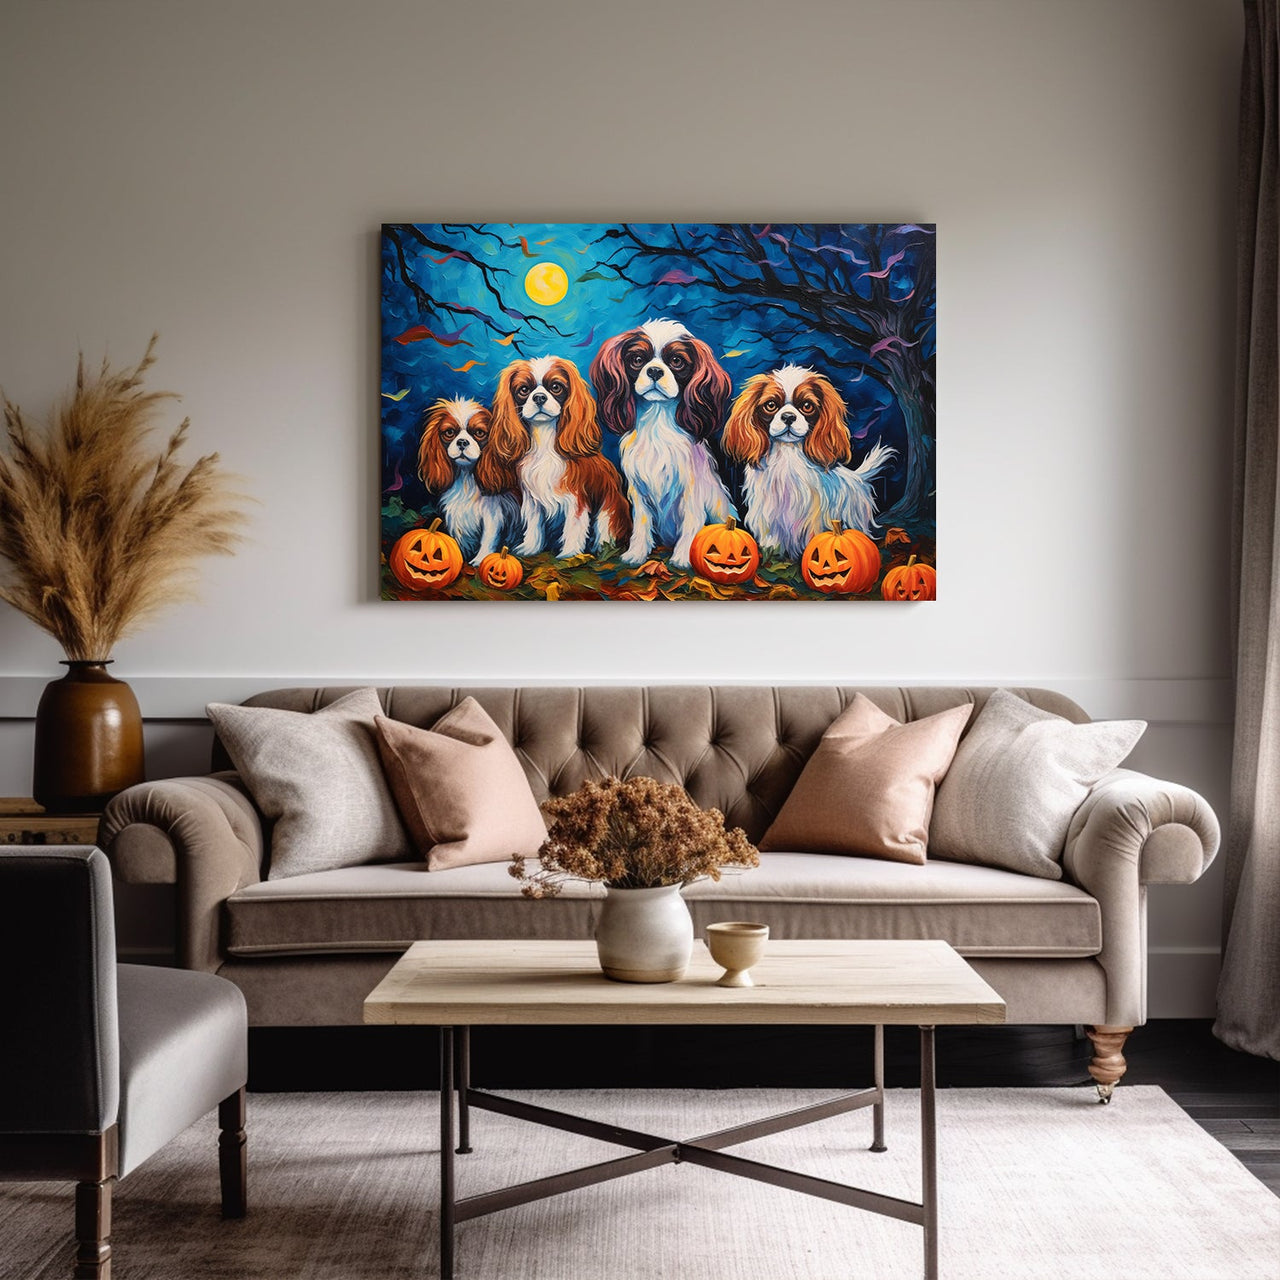 Cavalier King Charles Spaniels Halloween With Pumpkin Oil Painting Van Goh Style, Wooden Canvas Prints Wall Art Painting , Canvas 3d Art